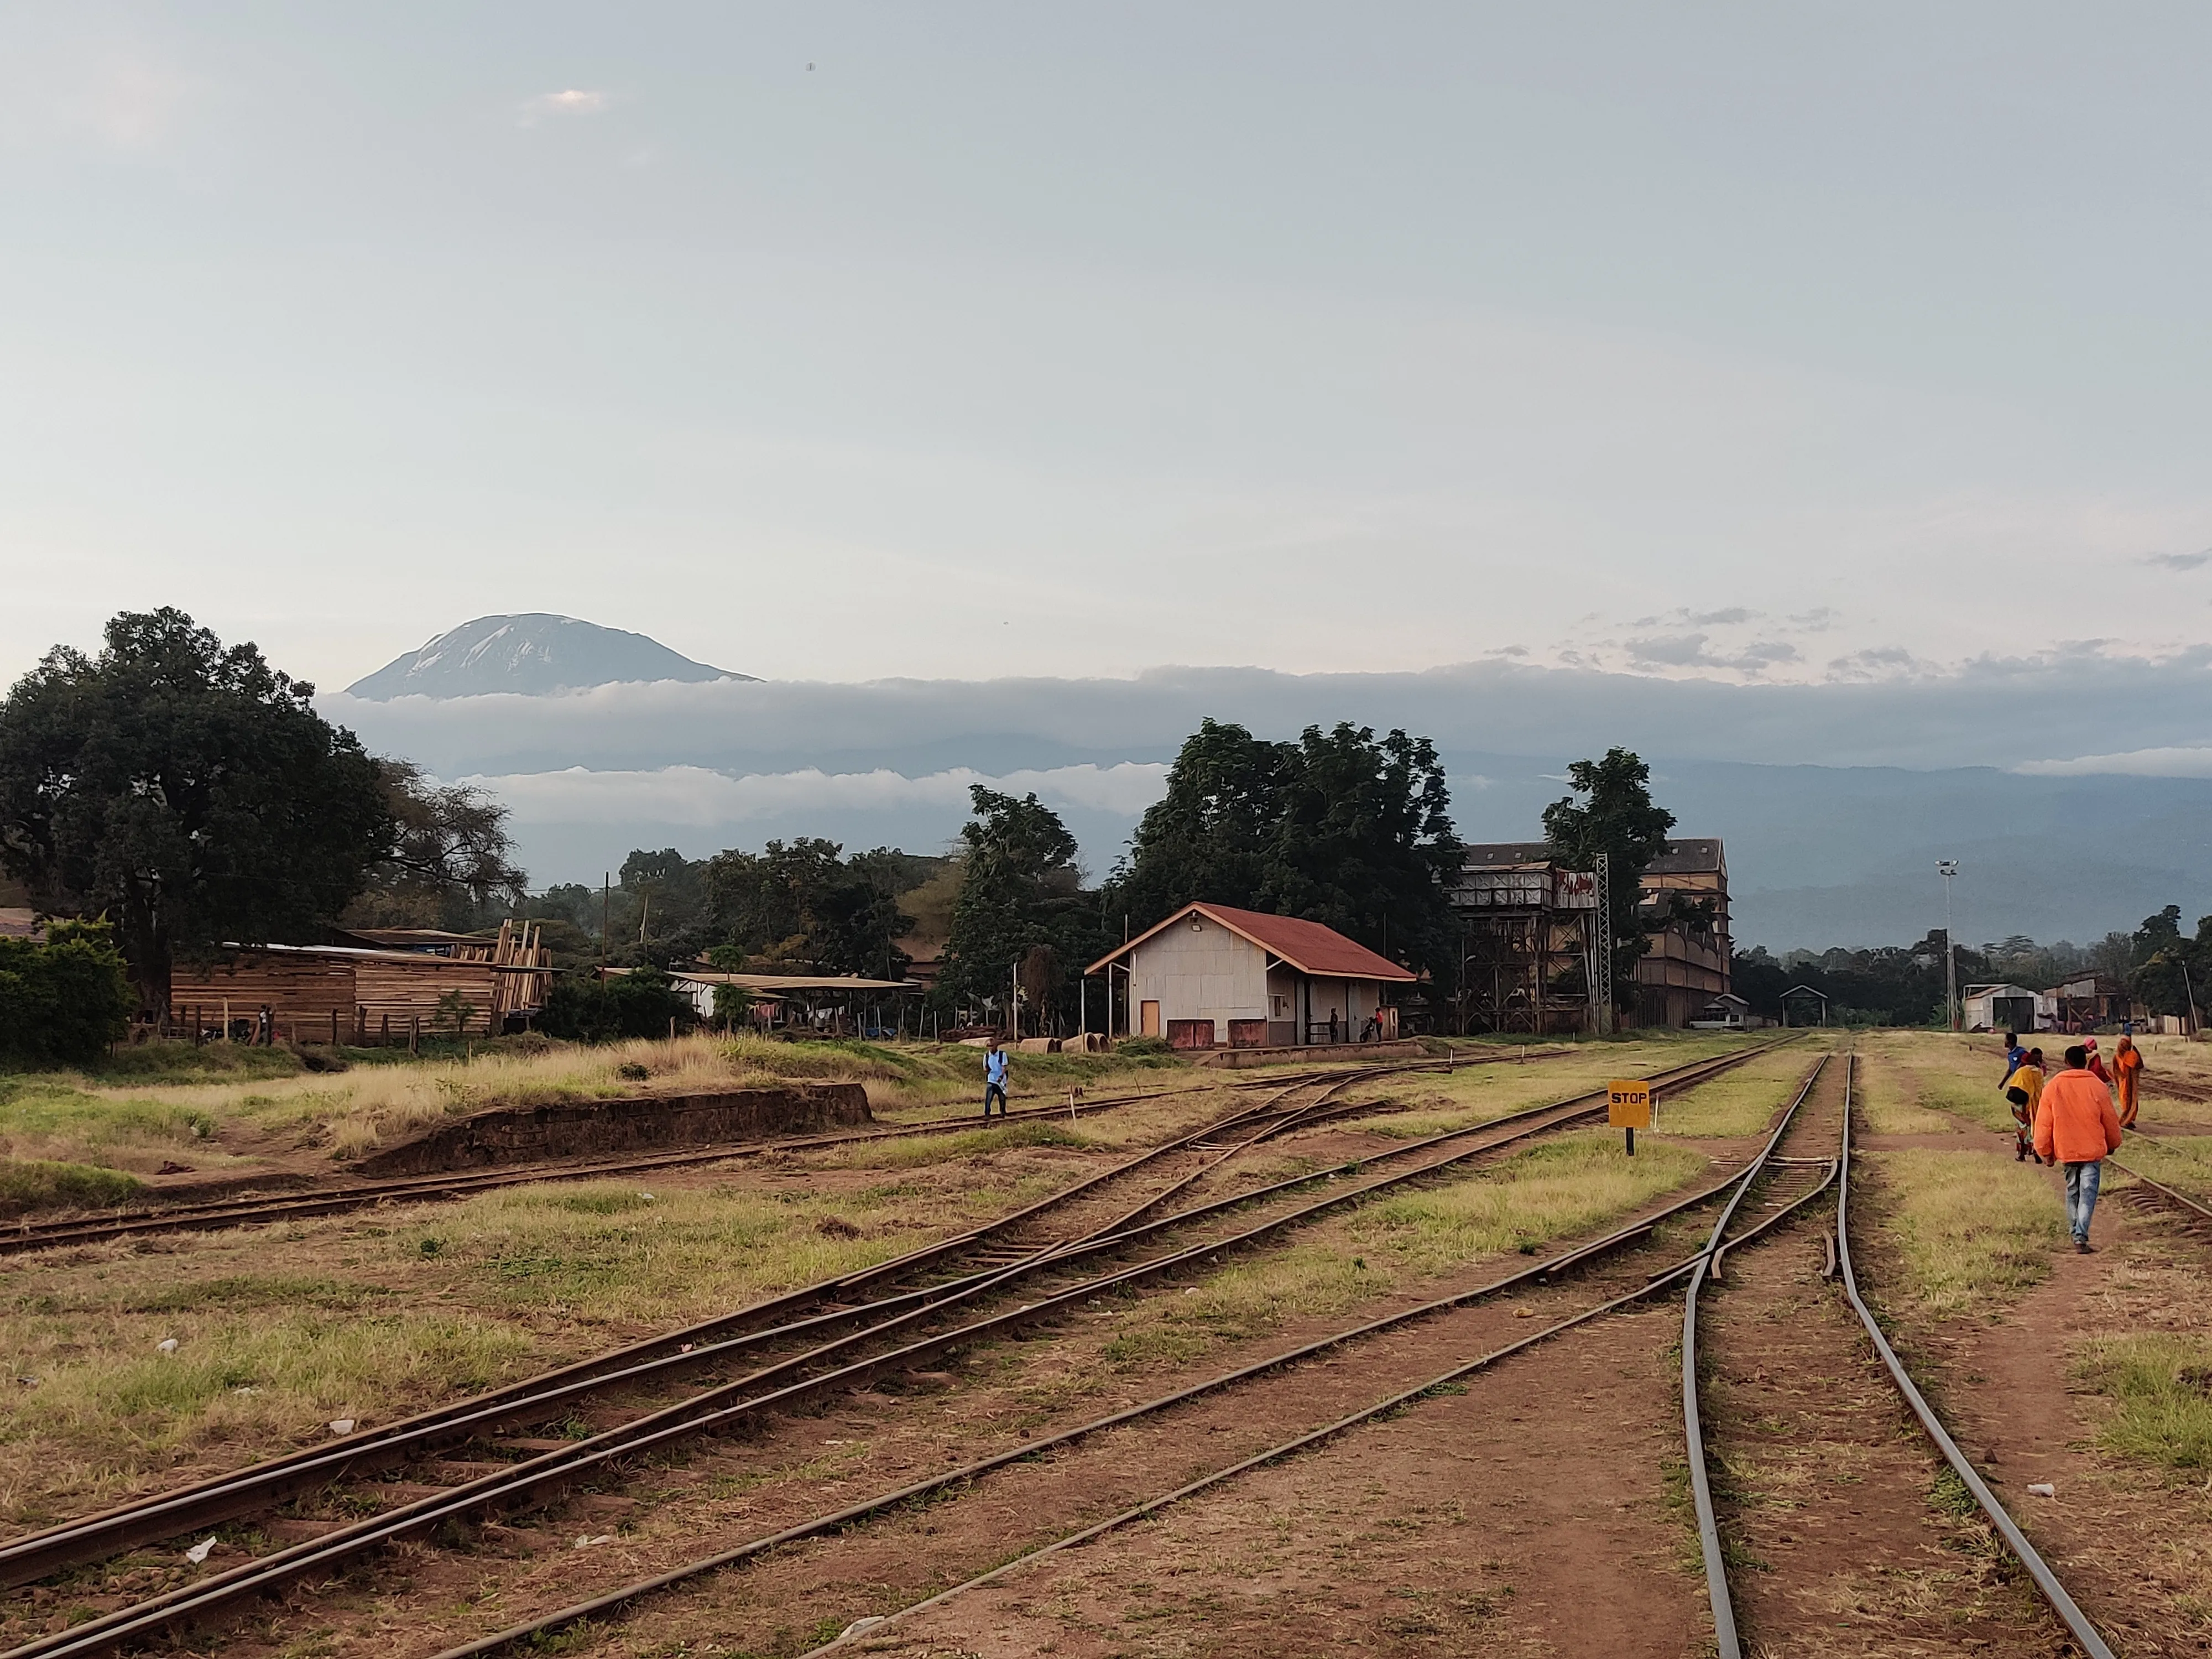 Moshi Trainstation with Mount Kilimanjaro in the Background